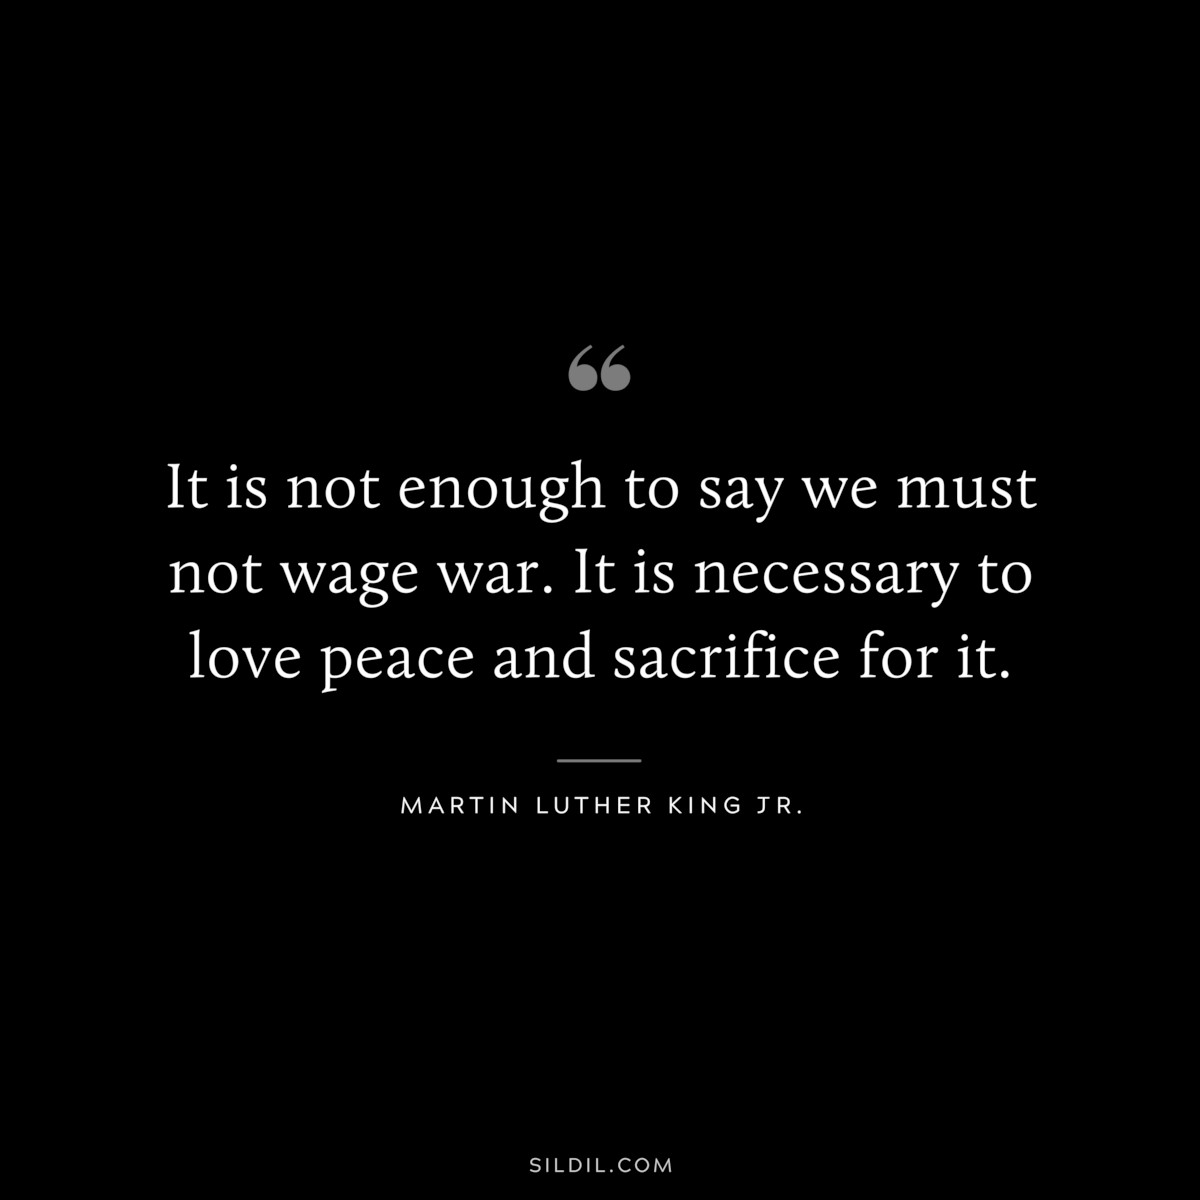 It is not enough to say we must not wage war. It is necessary to love peace and sacrifice for it. ― Martin Luther King Jr.